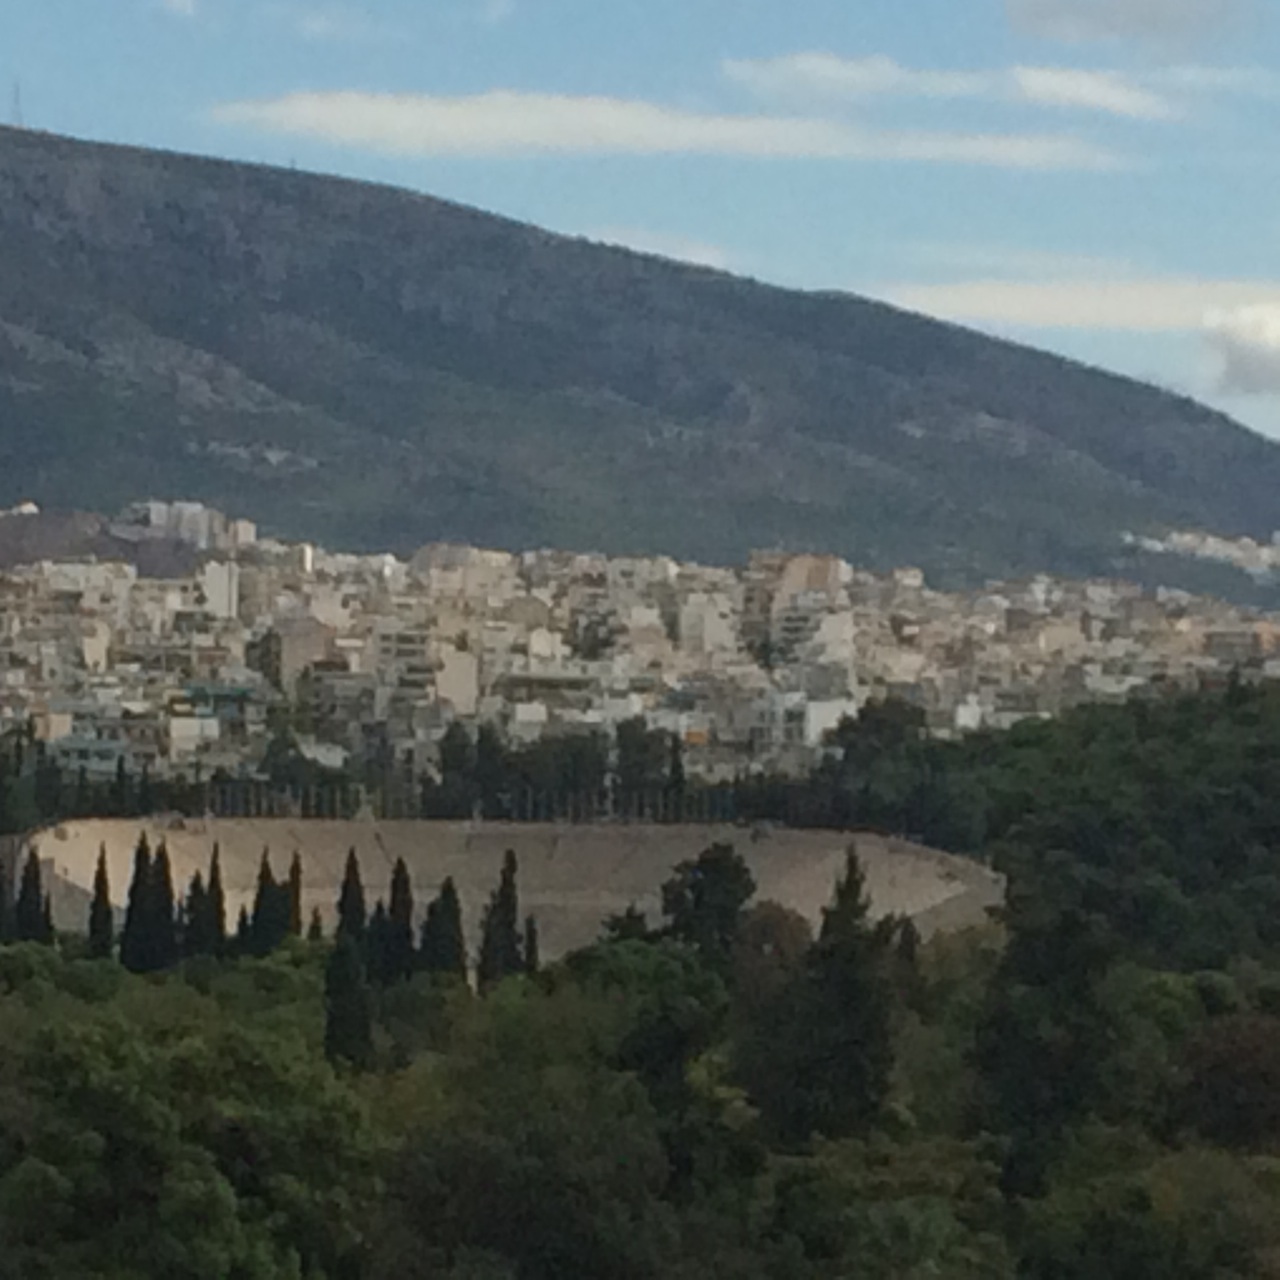 Sightseeing Athens: The First Olympic Stadium of the modern Olympics in Athens (Olympics of 1896)